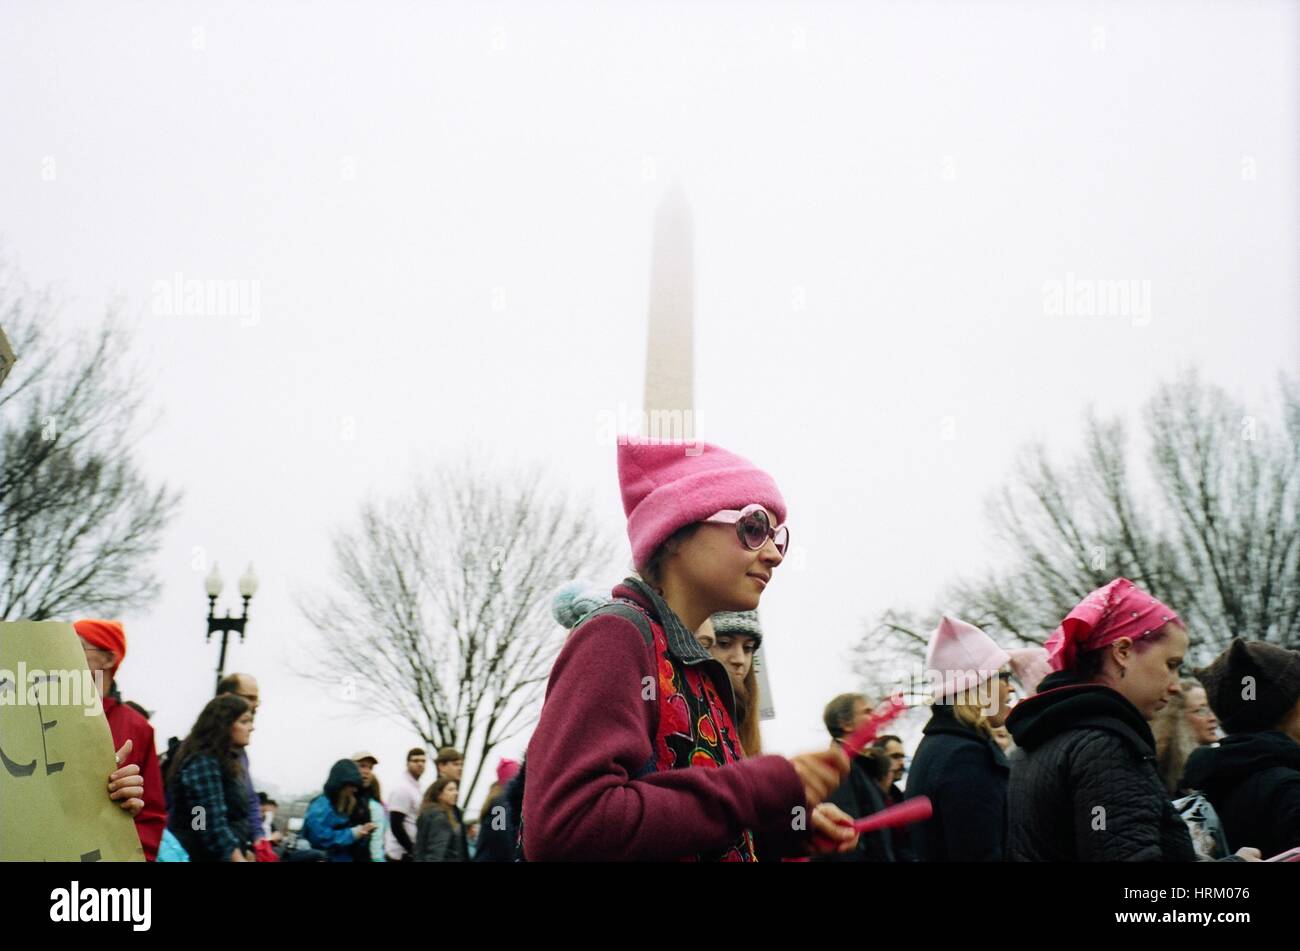 Girl in front of Washington Monument Scenes from the Women's March on Washington the day after Donald J. Trump's inauguration as the 45th President of the United States of America. (Photo by Jeremy Hogan) Stock Photo